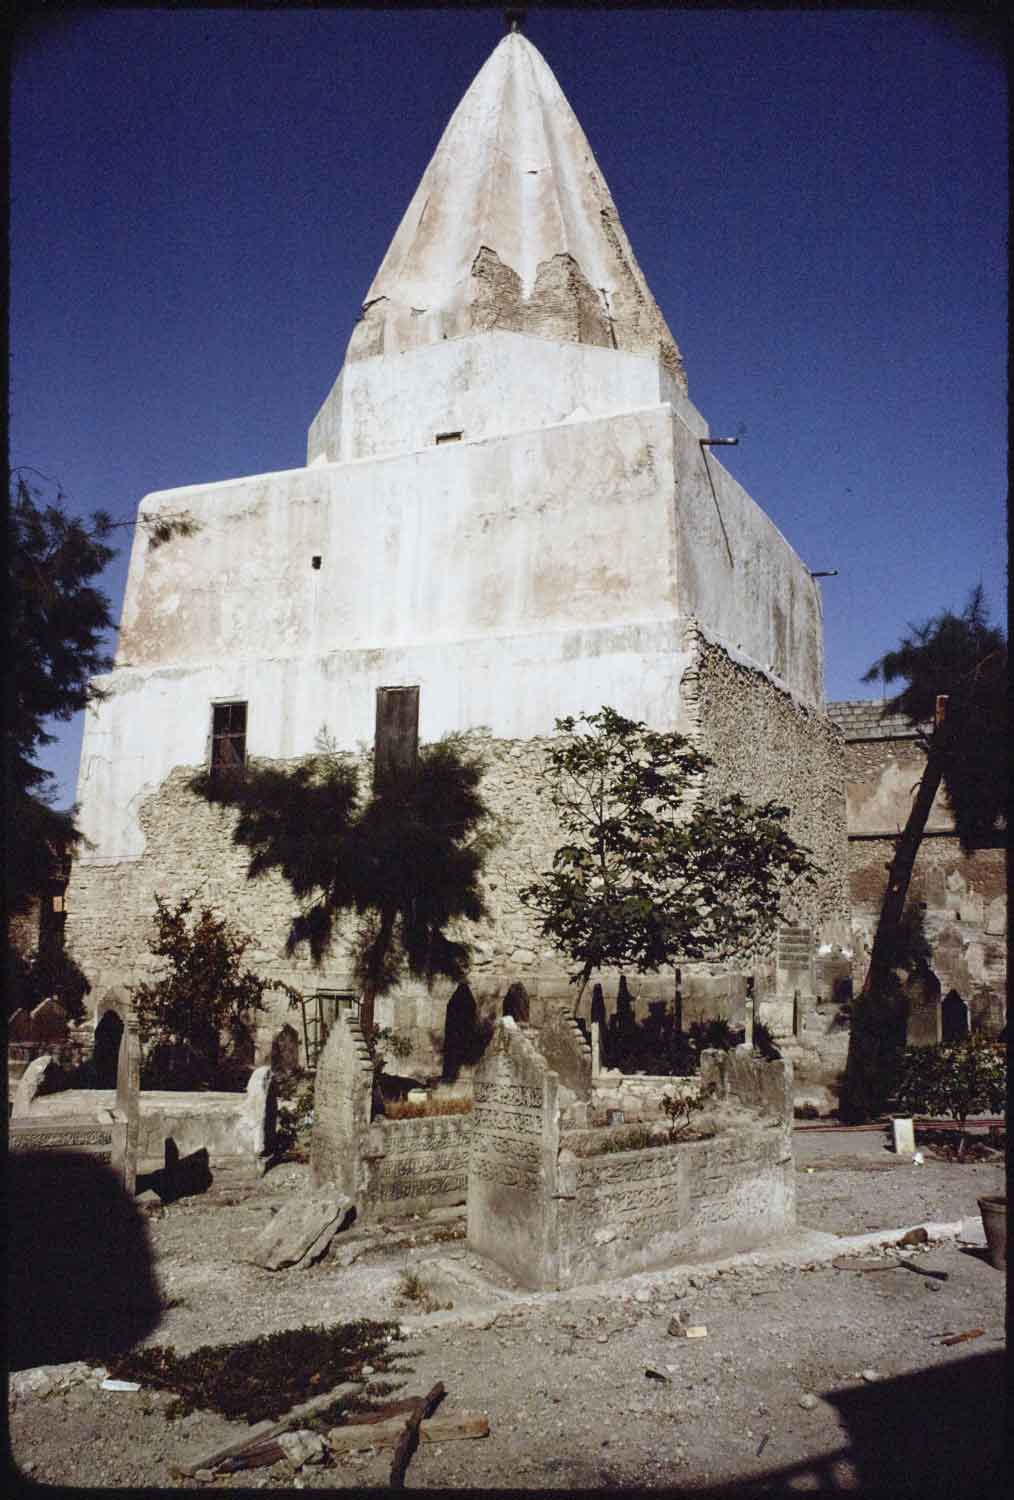 View of the dome's exterior from the cemetary, 1979.